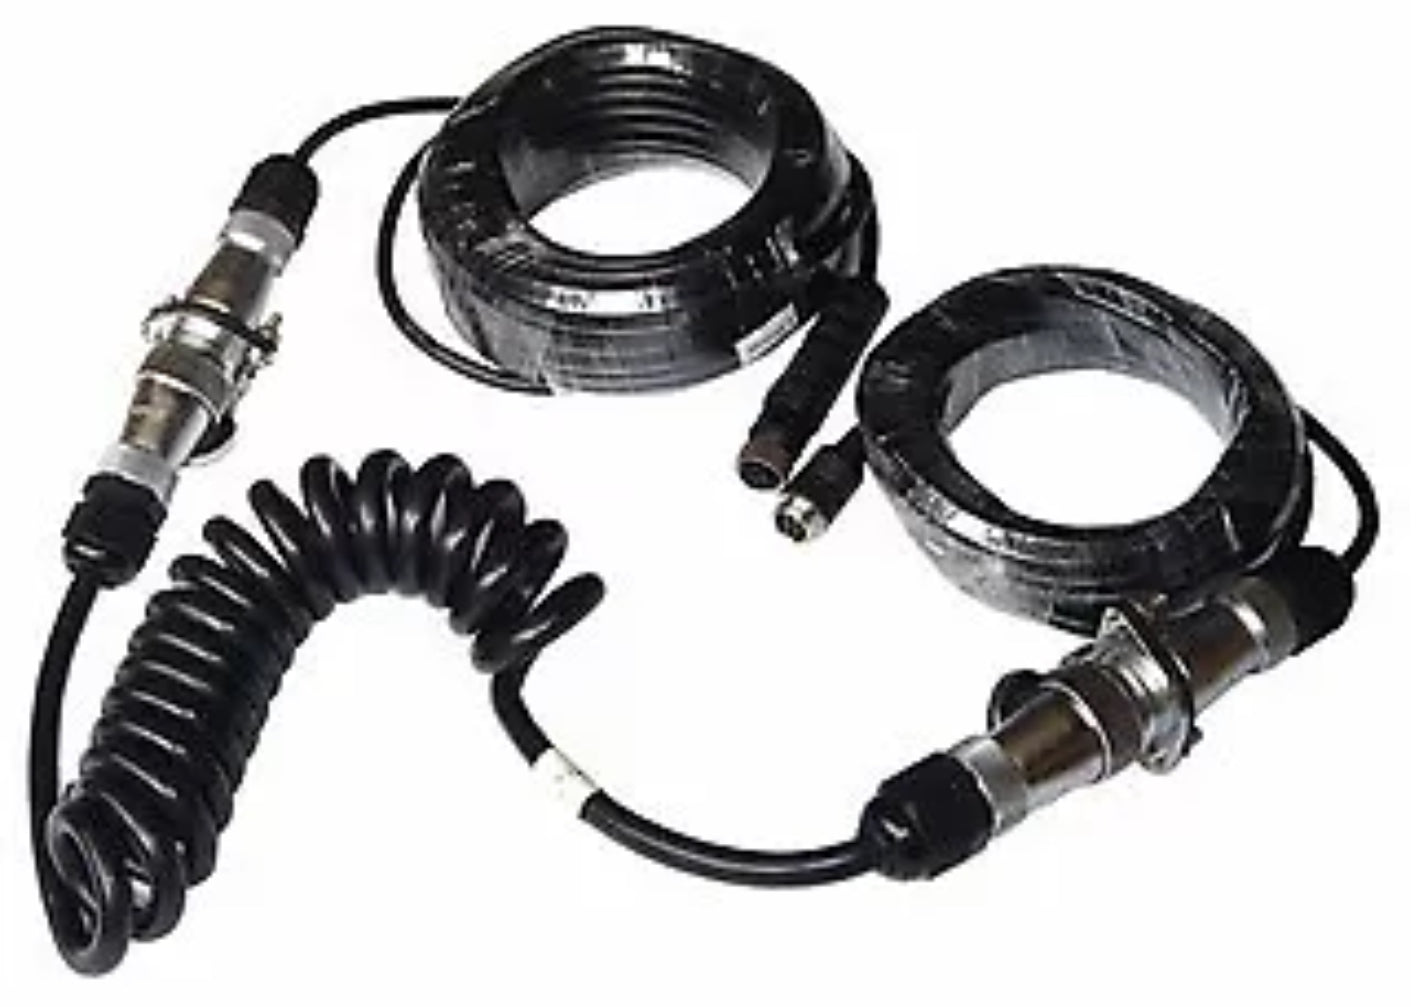 Parksafe 26-044HDL Single WOZA / Suzi Cable for Heavy Duty Systems incl. 15Mtr + 5Mtr extension cables